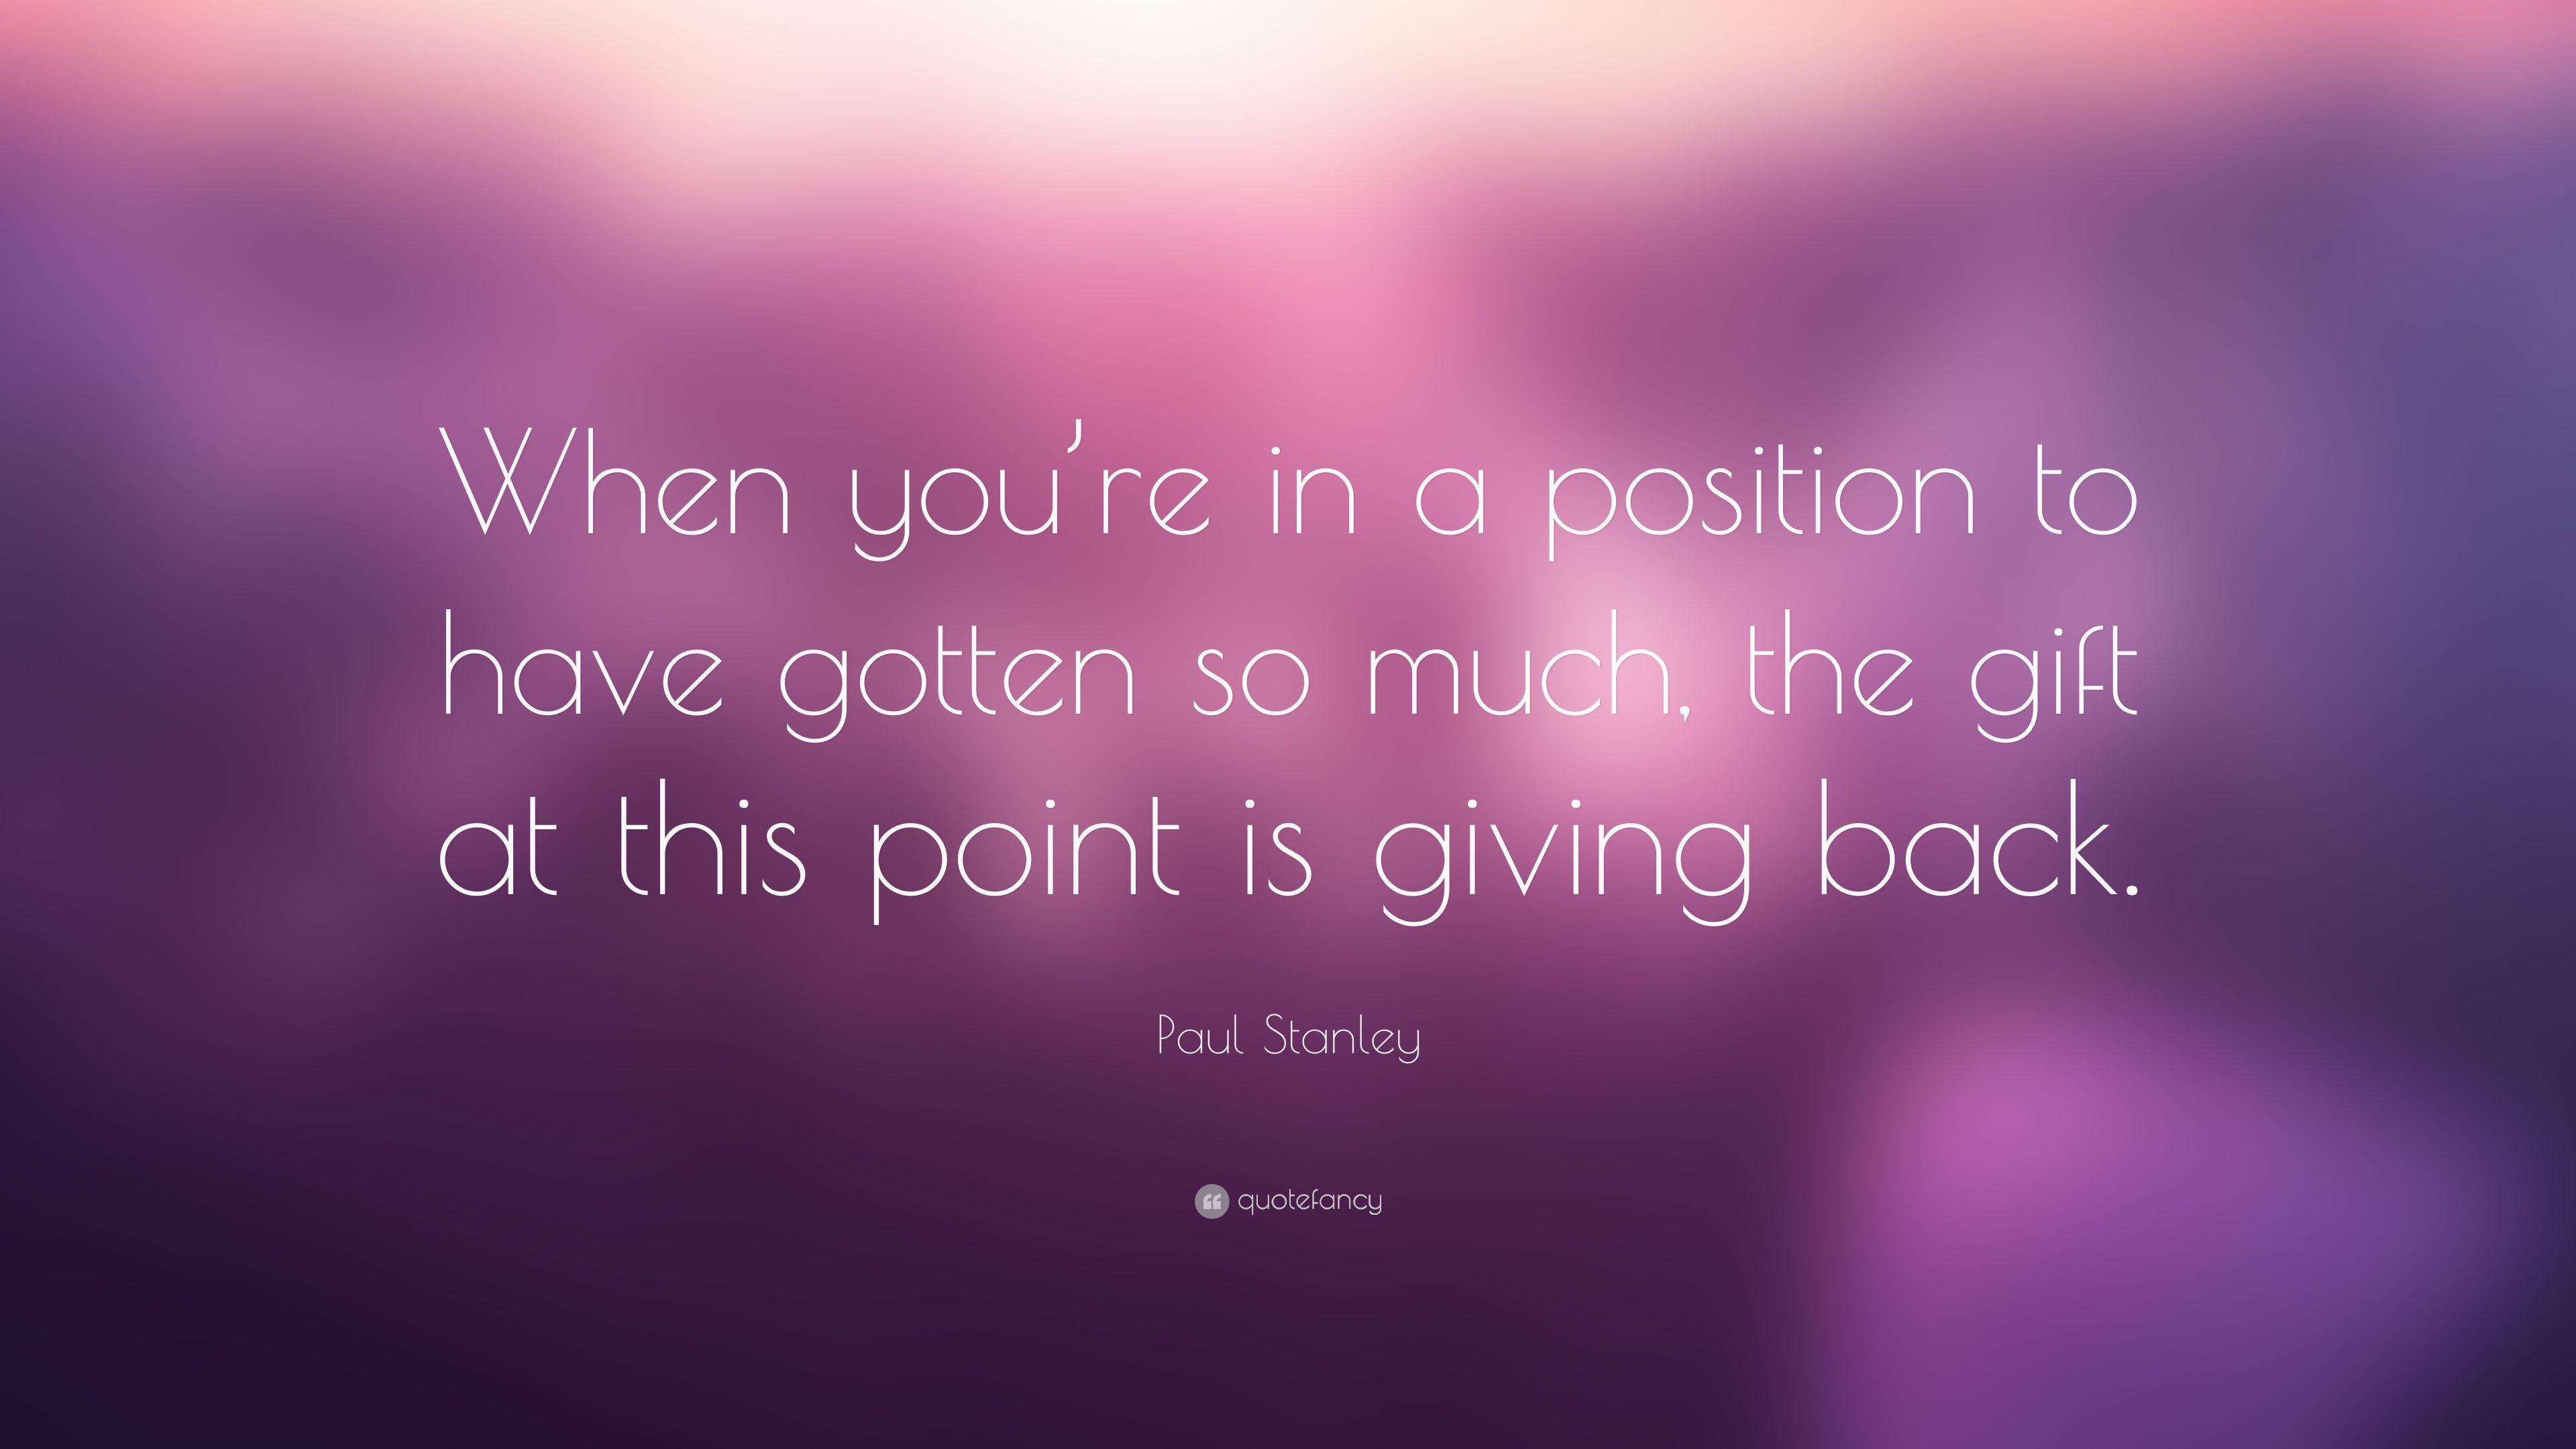 Paul Stanley Quote: “When you're in a position to have gotten so